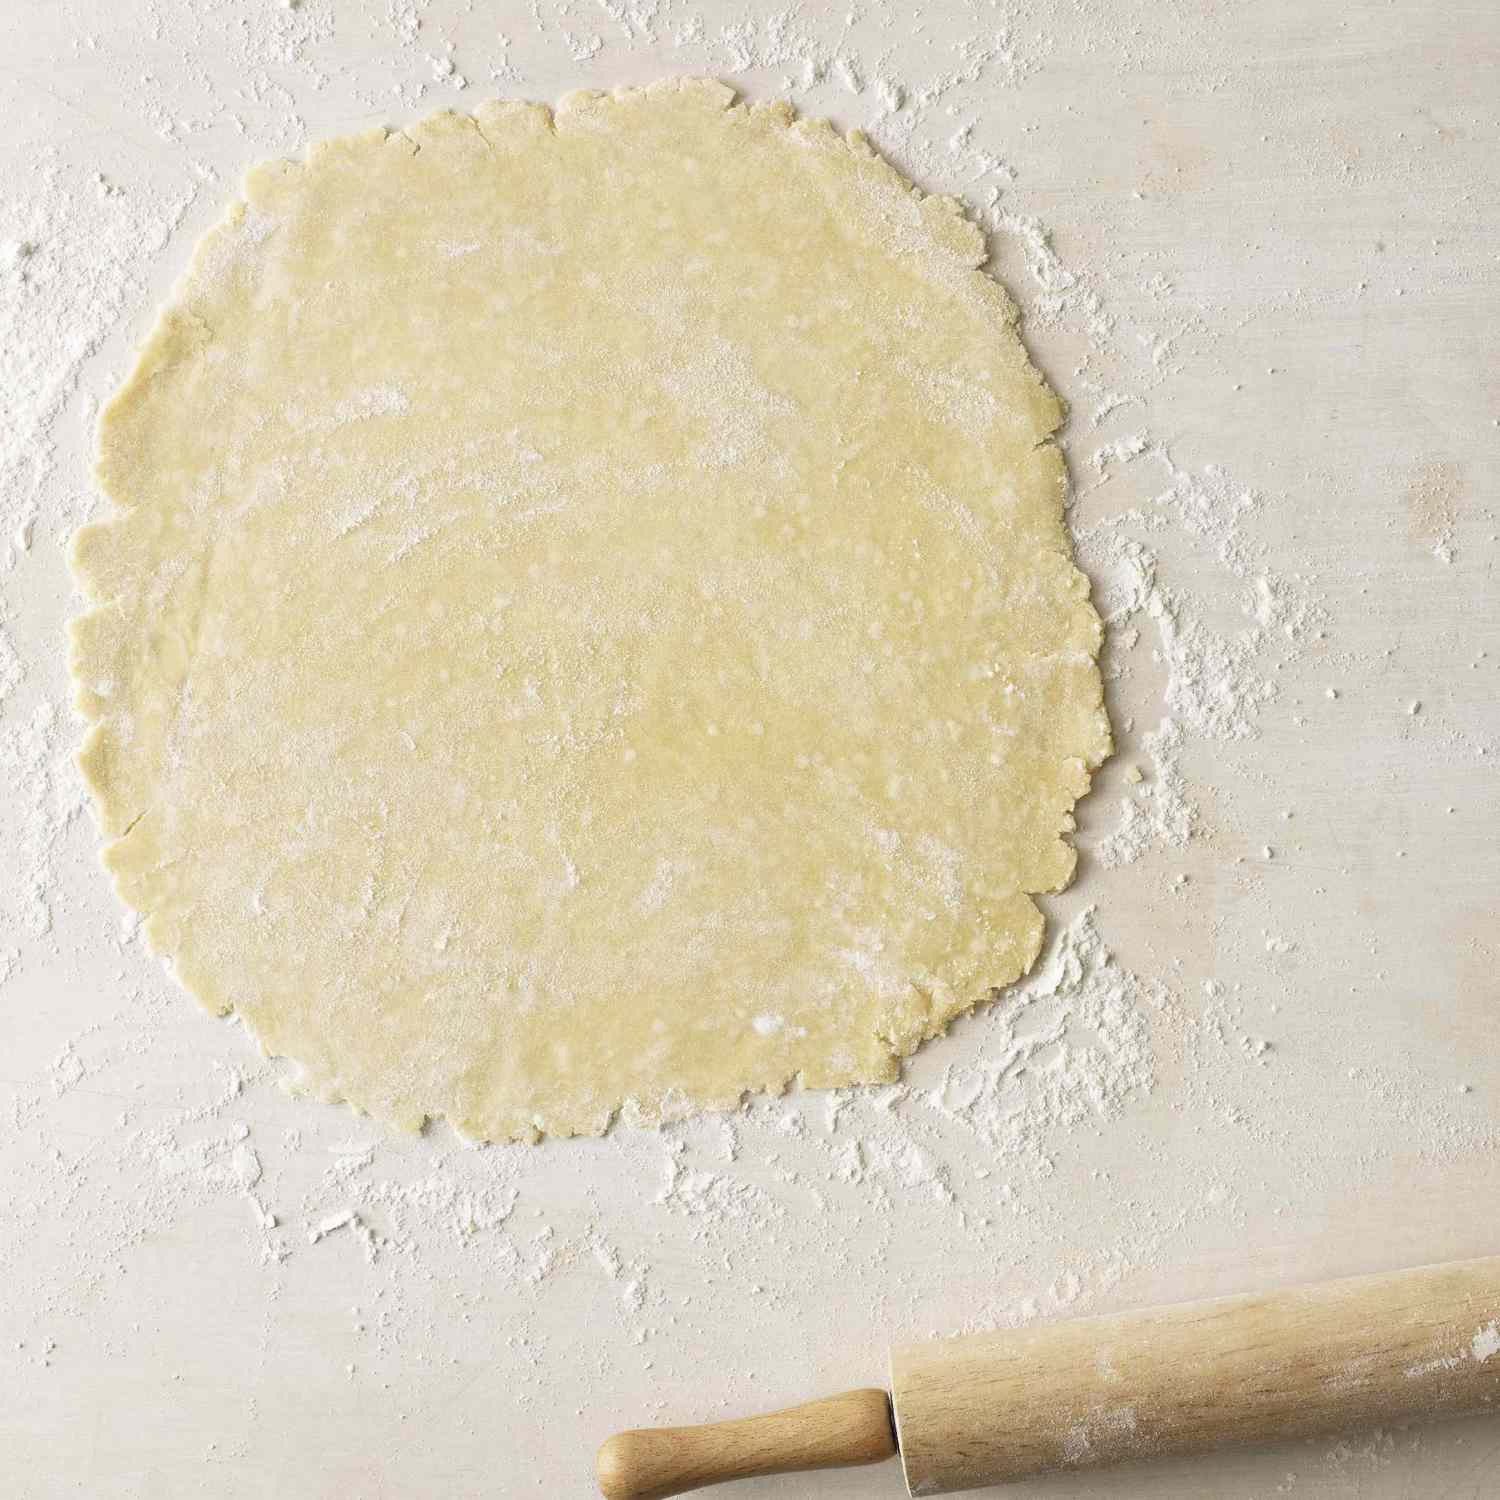 rolled out pastry dough on a countertop